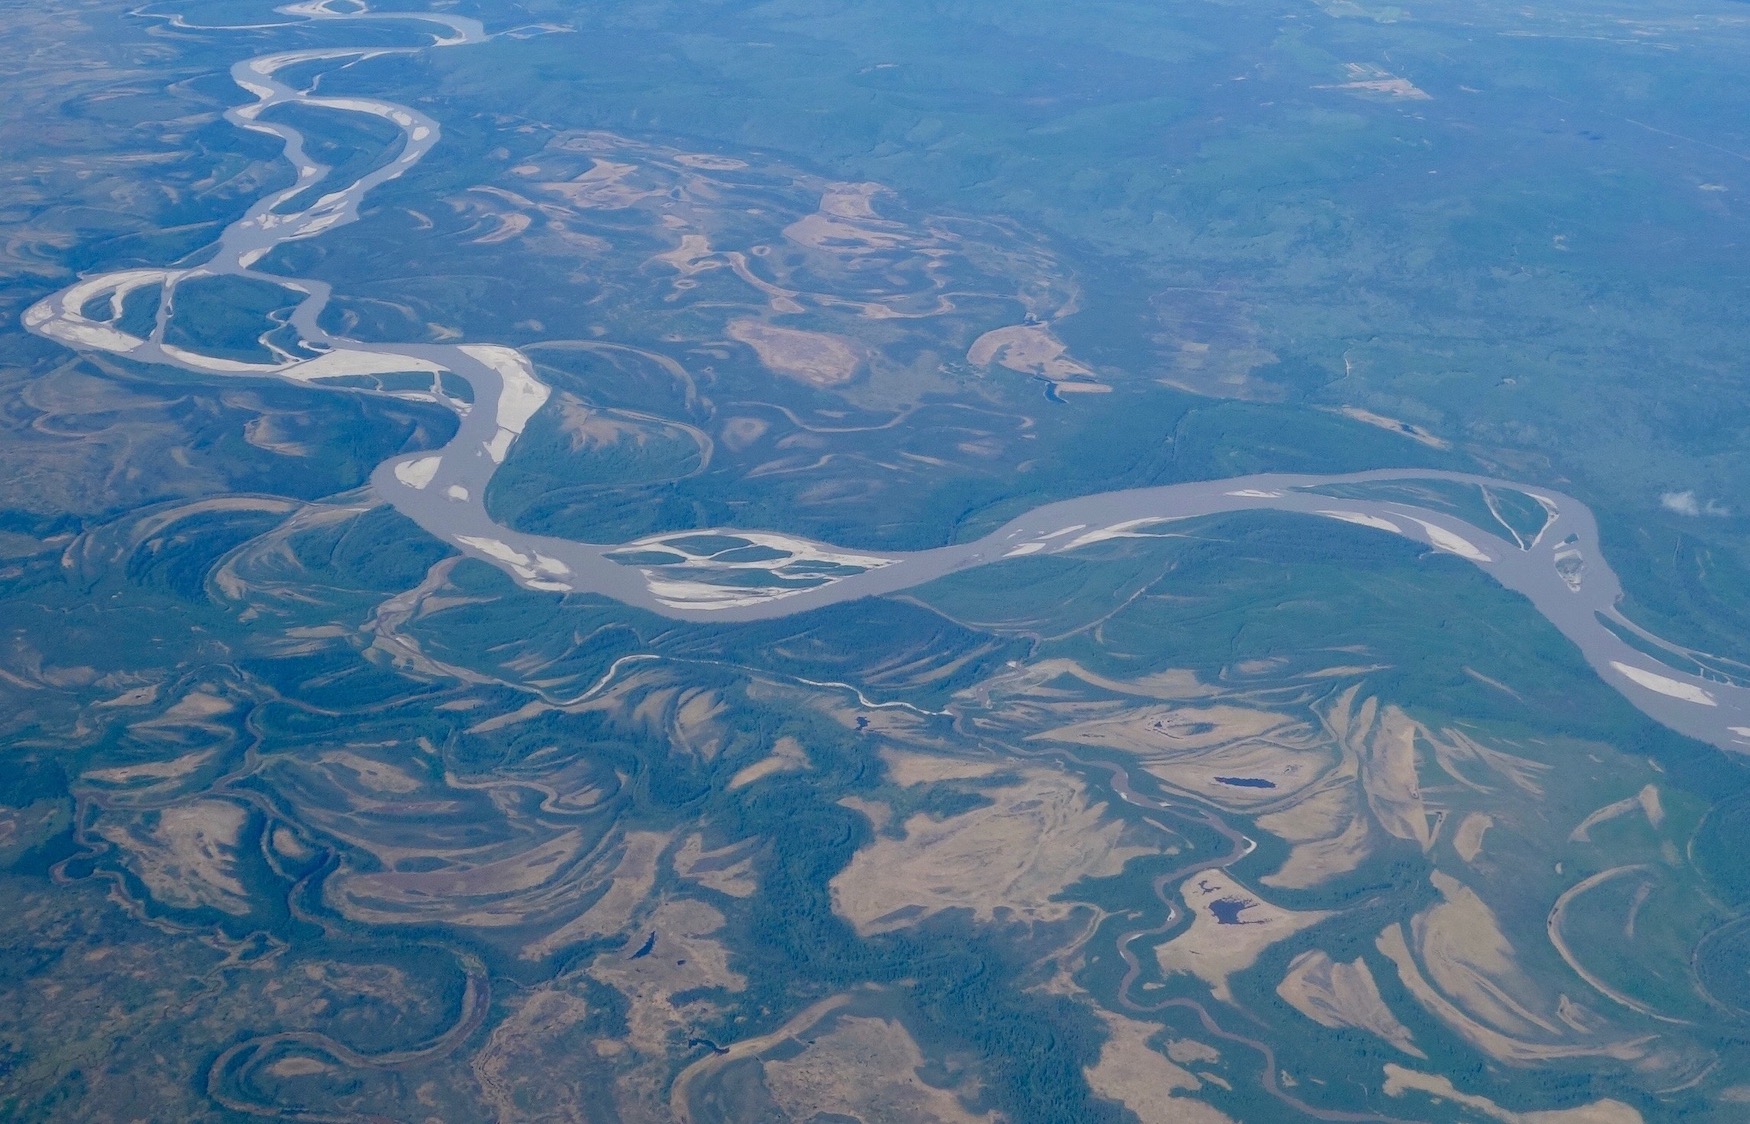 Photographed from an aircraft at an elevation of several thousand feet, a braided river with numerous gray sand islands and bars winds through a flatland. Surrounding the river are green forests of spruce and deciduous trees, as well as marshes and old oxbow river bends filled with yellowing grasses. 